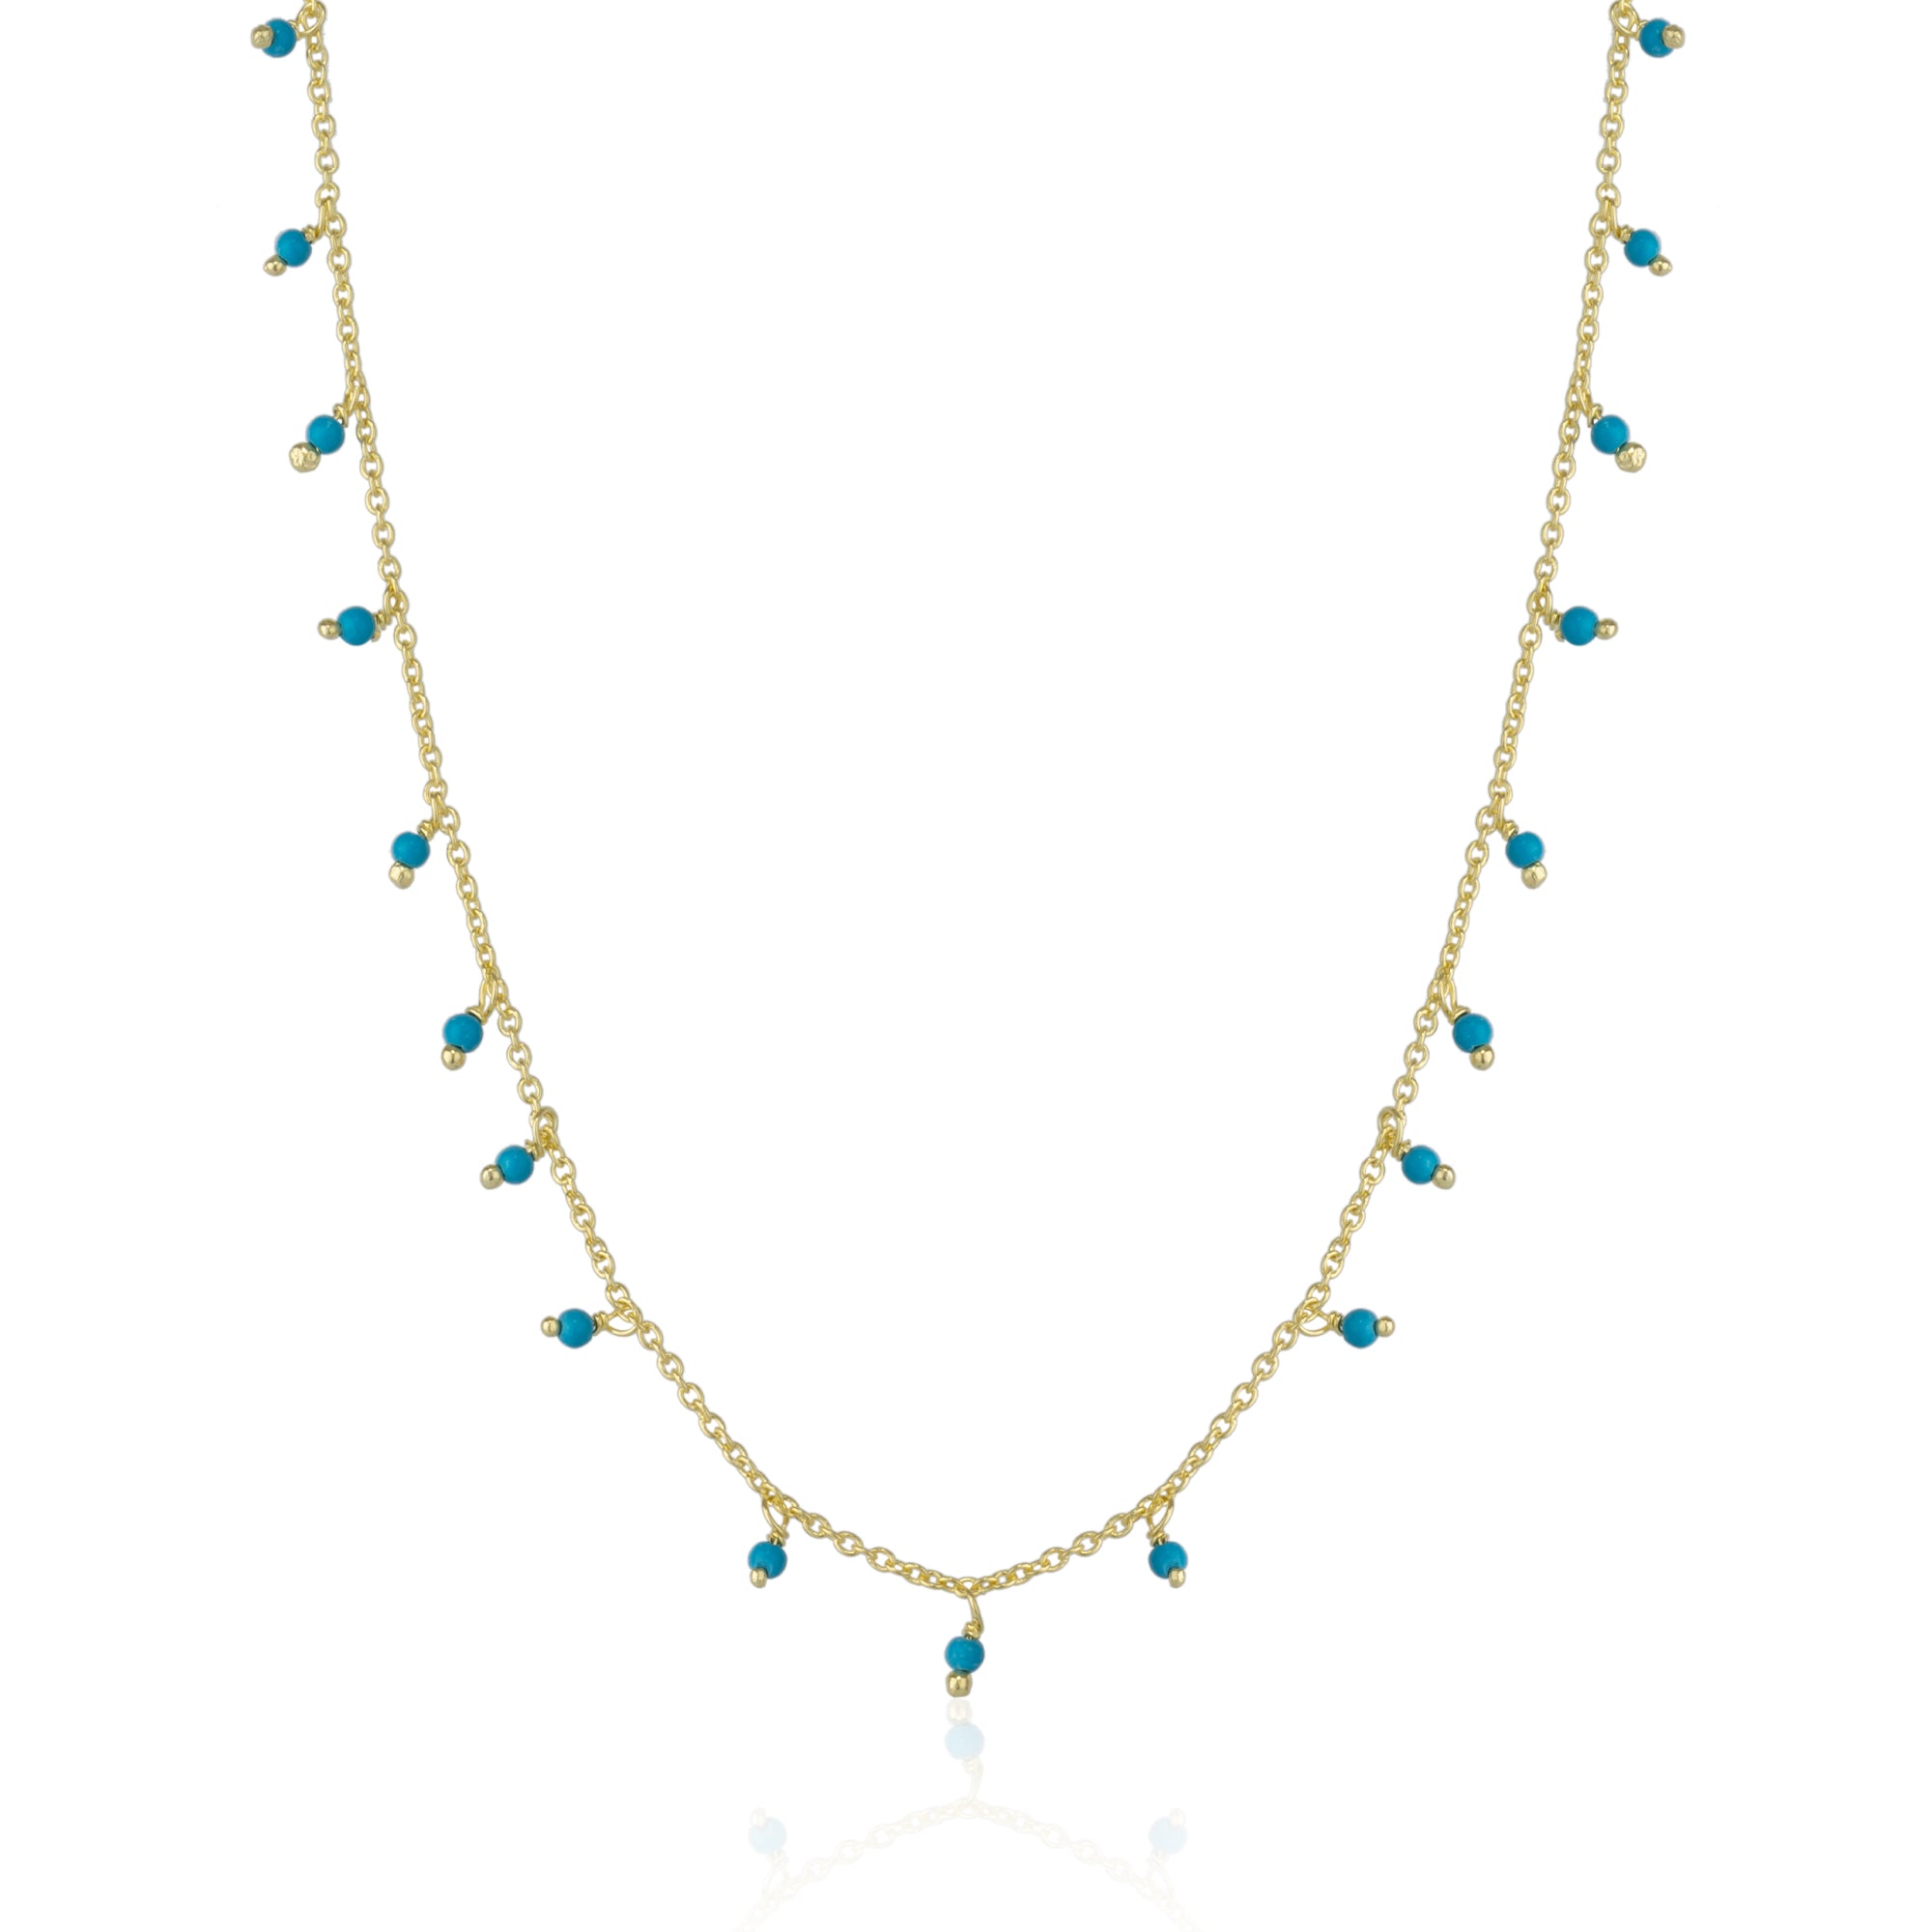 Blue Turquoise Beaded Sterling Silver Chain Necklace